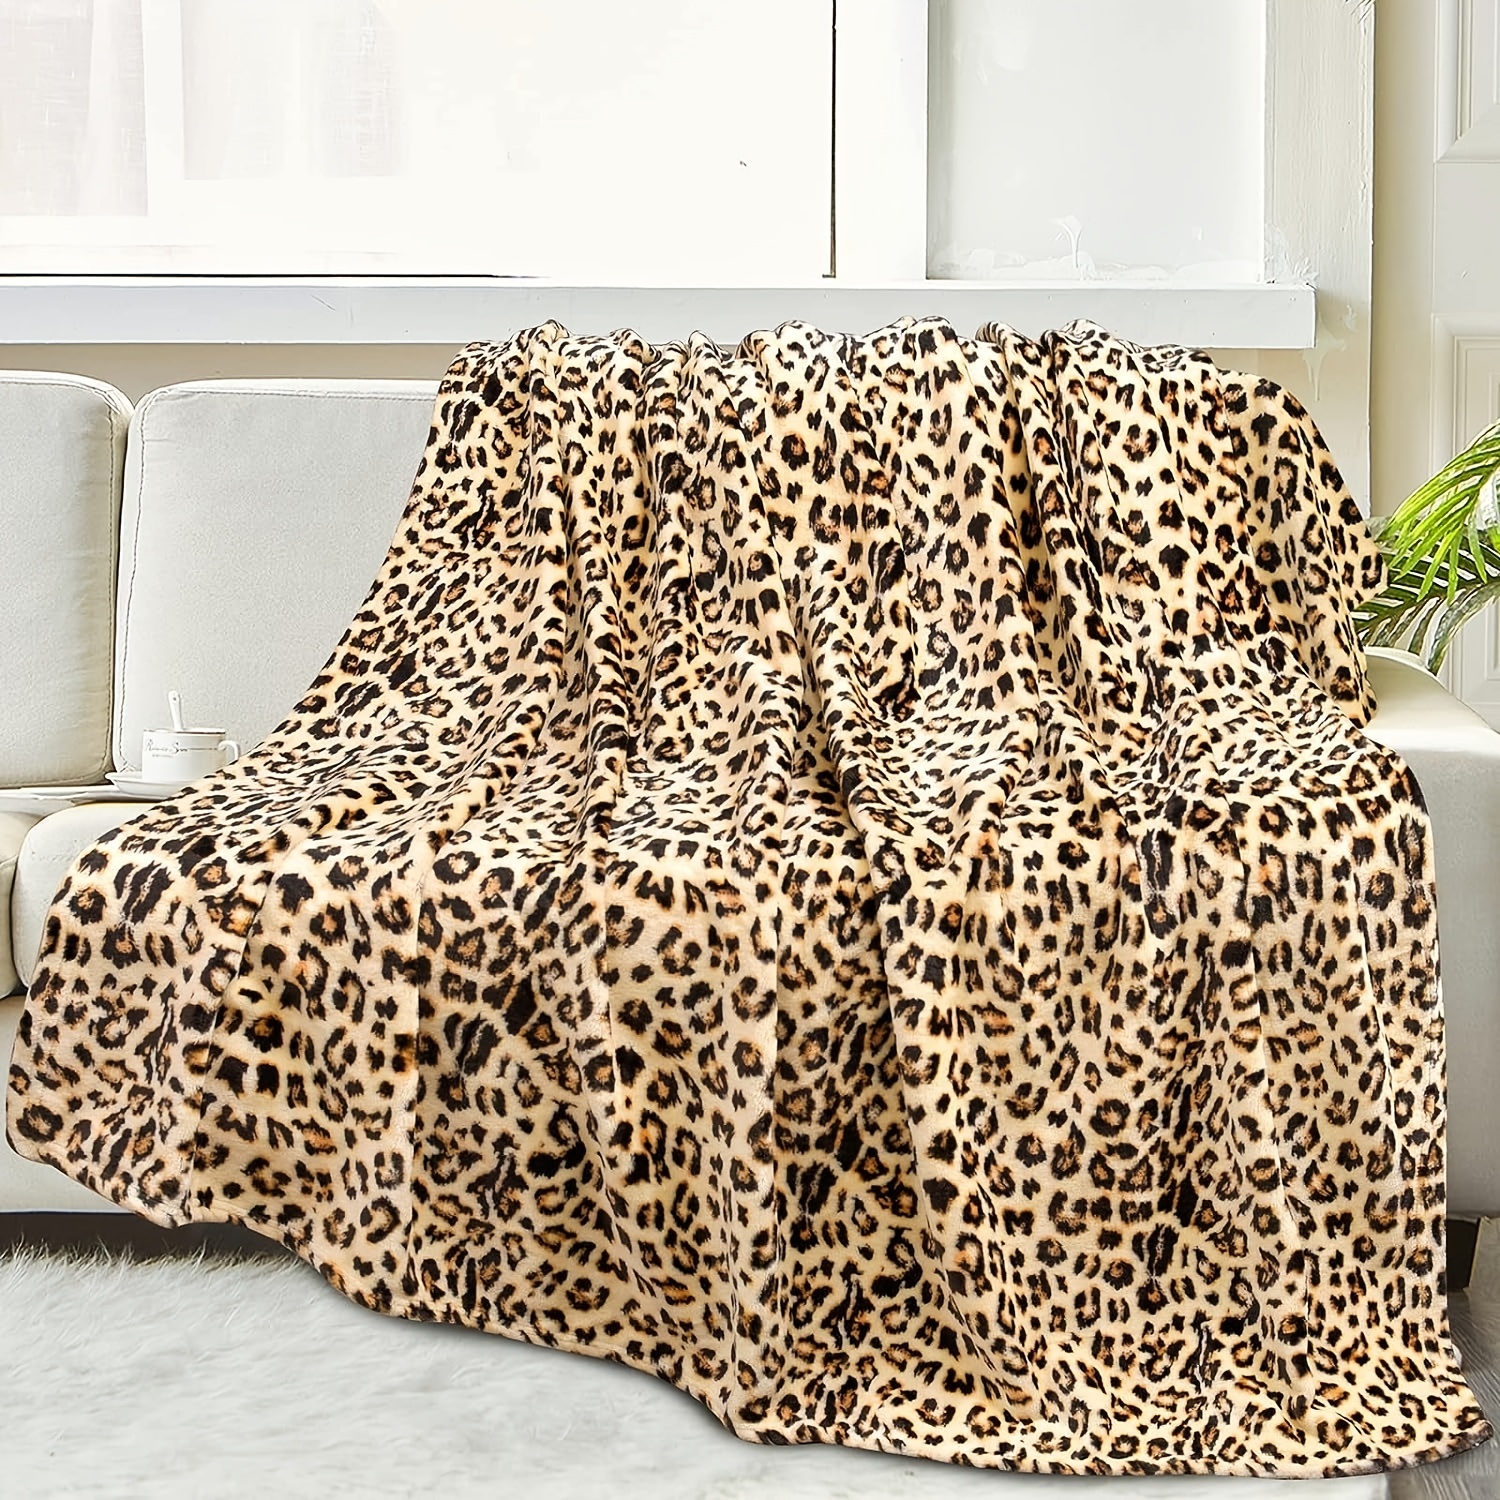 

1pc Leopard Blanket, Double Print Blanket Fuzzy Plush Fleece Throws And Blankets With Leopard Print For Sofa, Couch, Bed